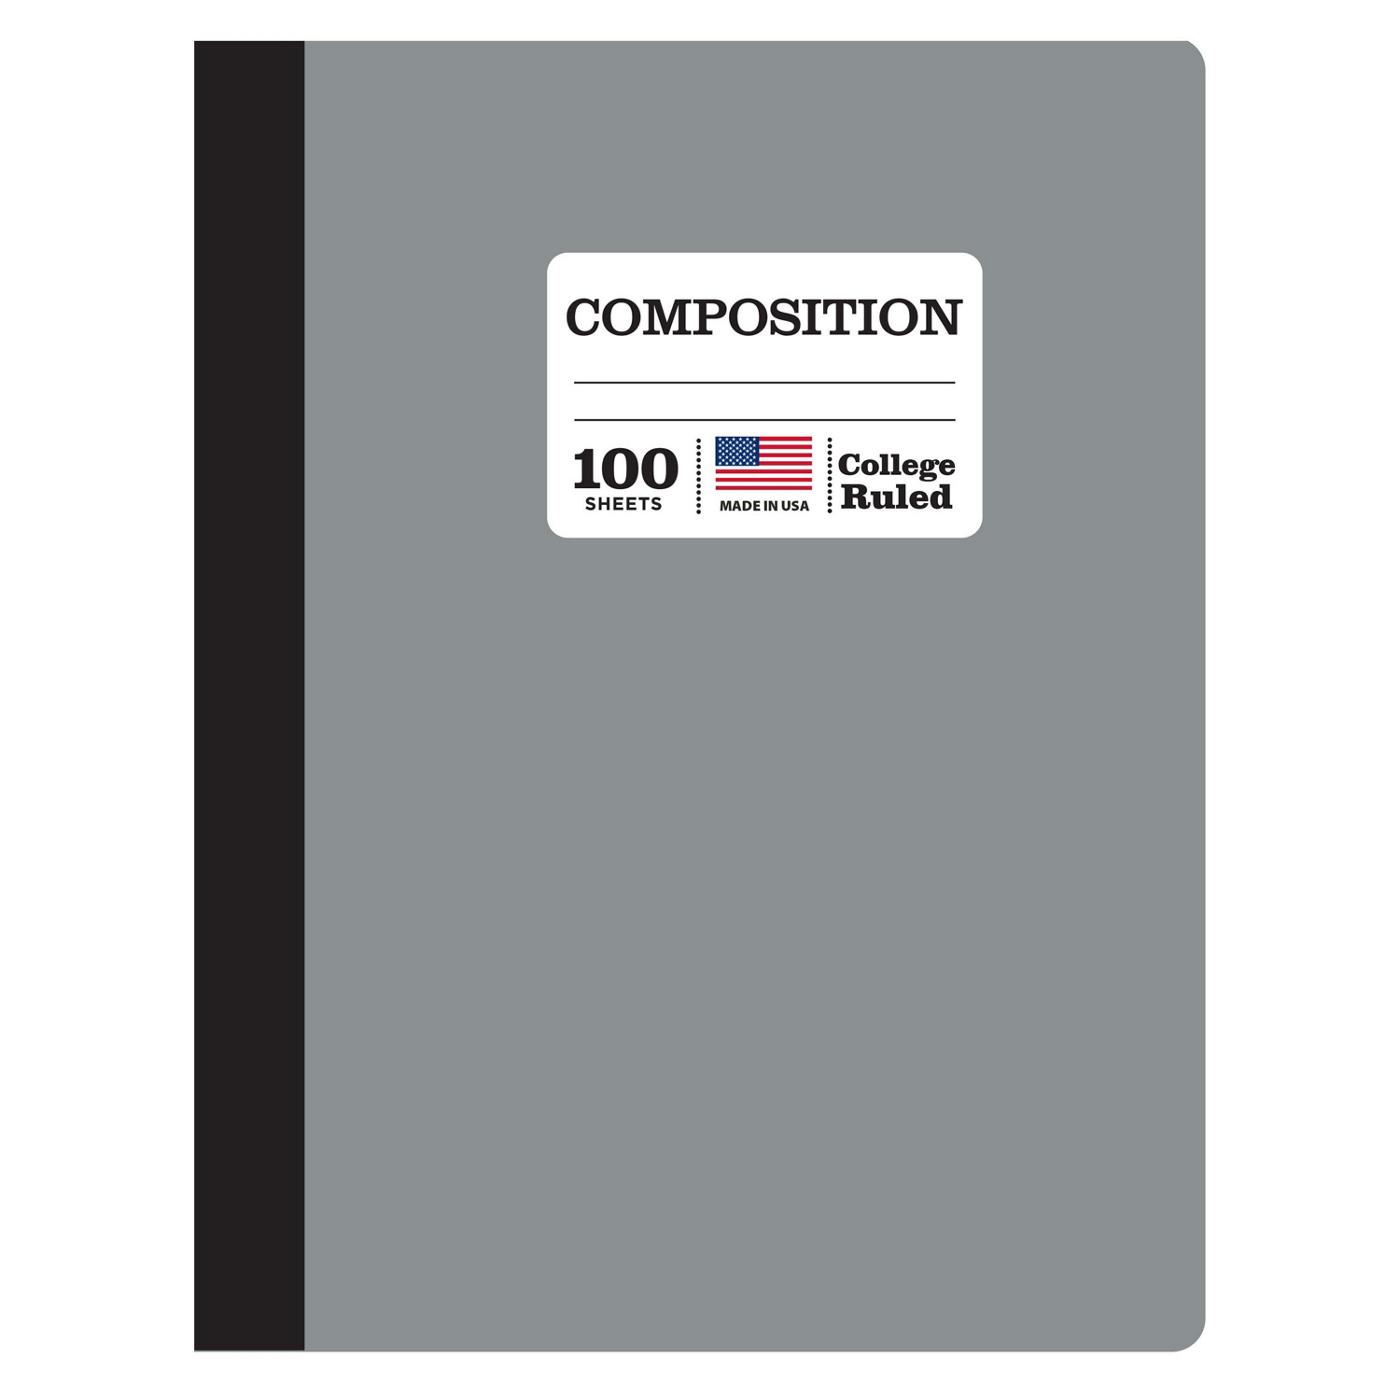 Norcom Collage Ruled Composition Notebook - Silver; image 1 of 2